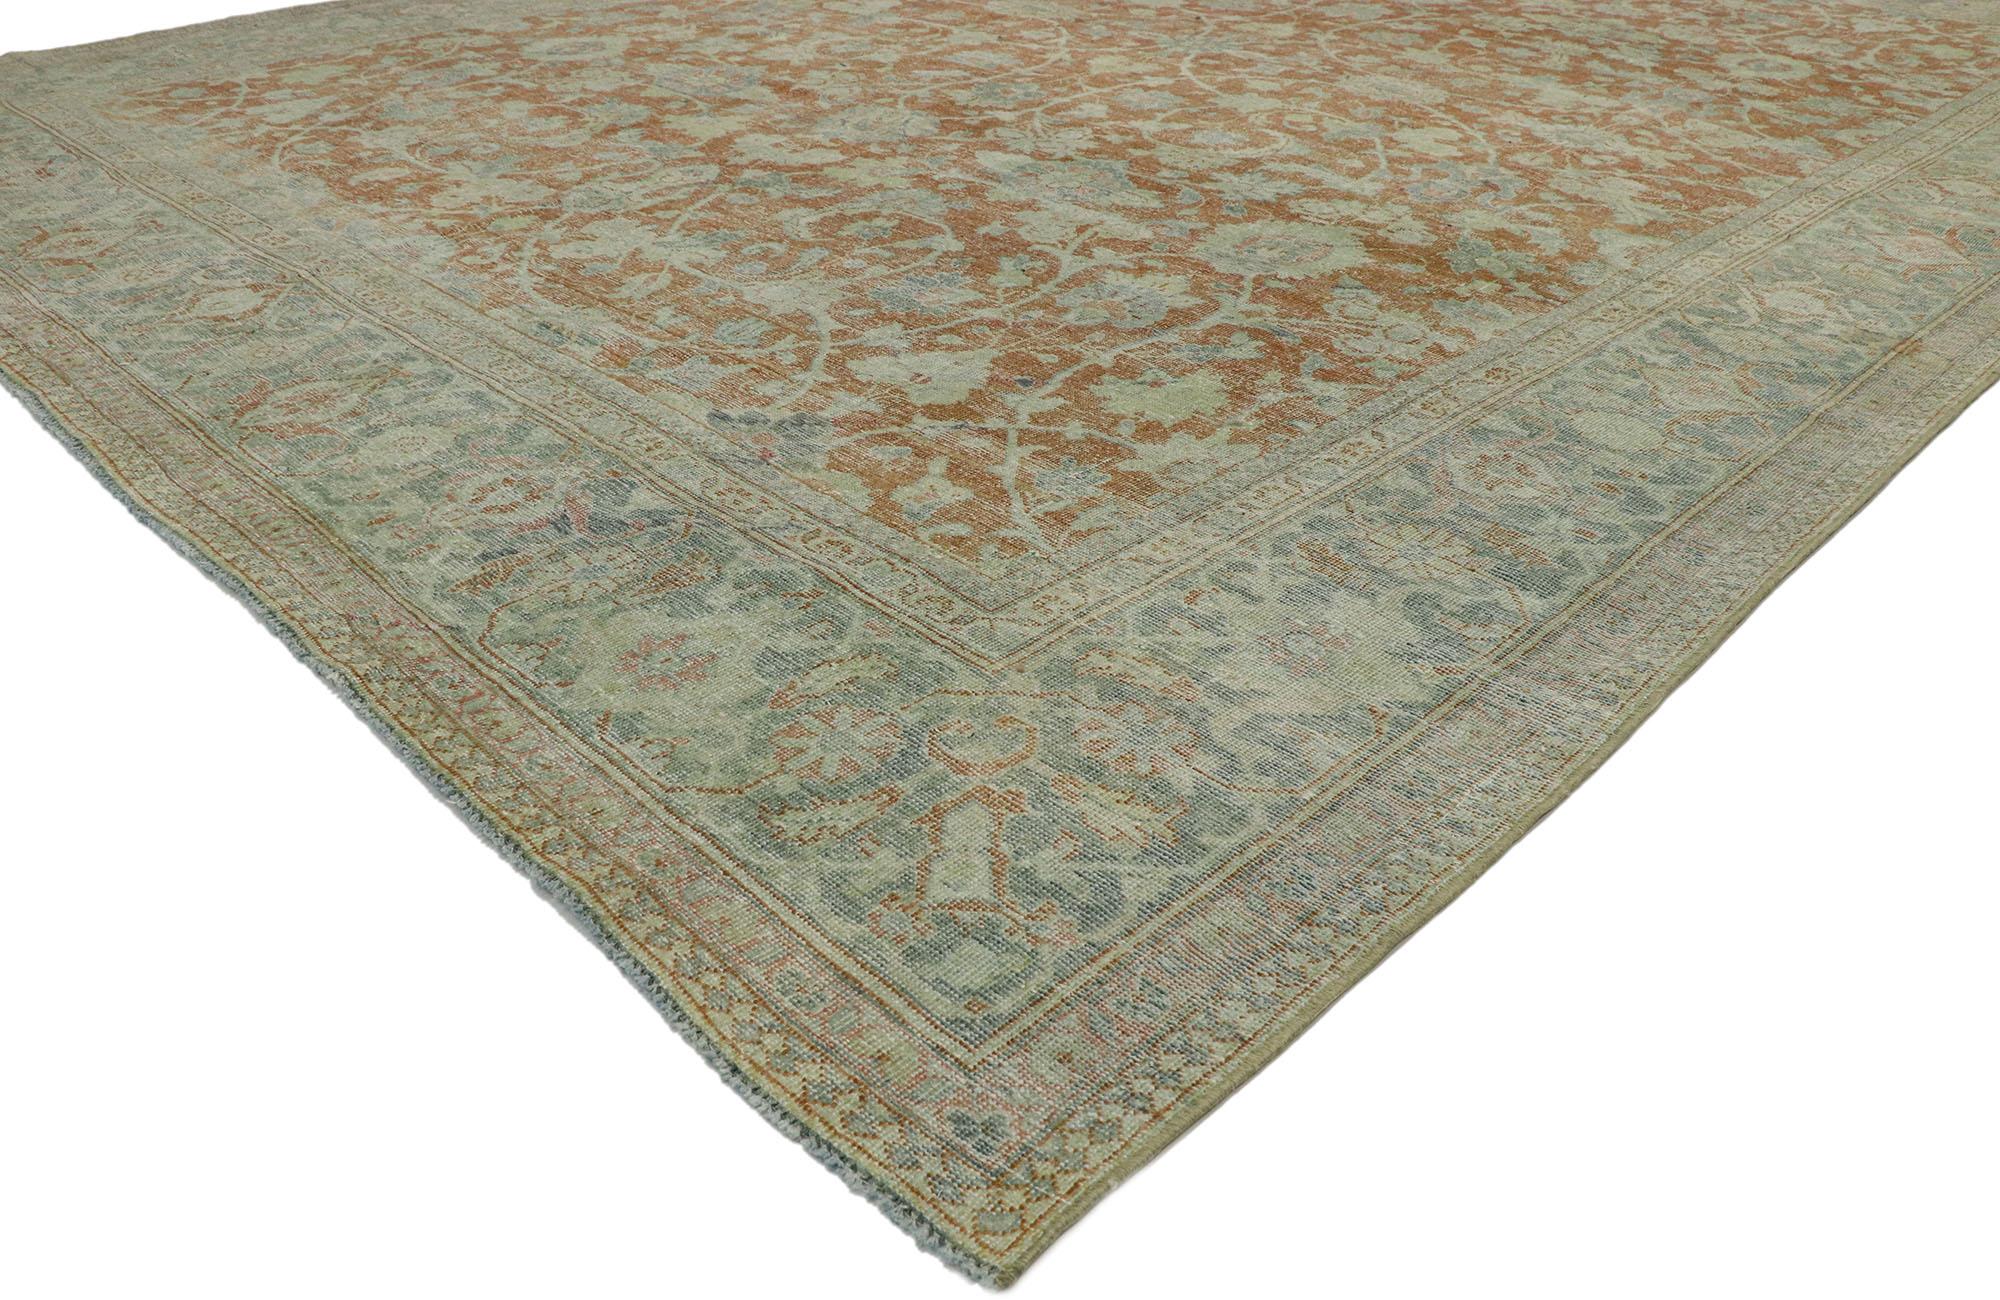 53217 distressed antique Persian Mahal rug with Relaxed Southern Living style. With its perfectly worn-in charm and rustic sensibility, this hand-knotted wool distressed antique Persian Mahal rug will take on a curated lived-in look that feels